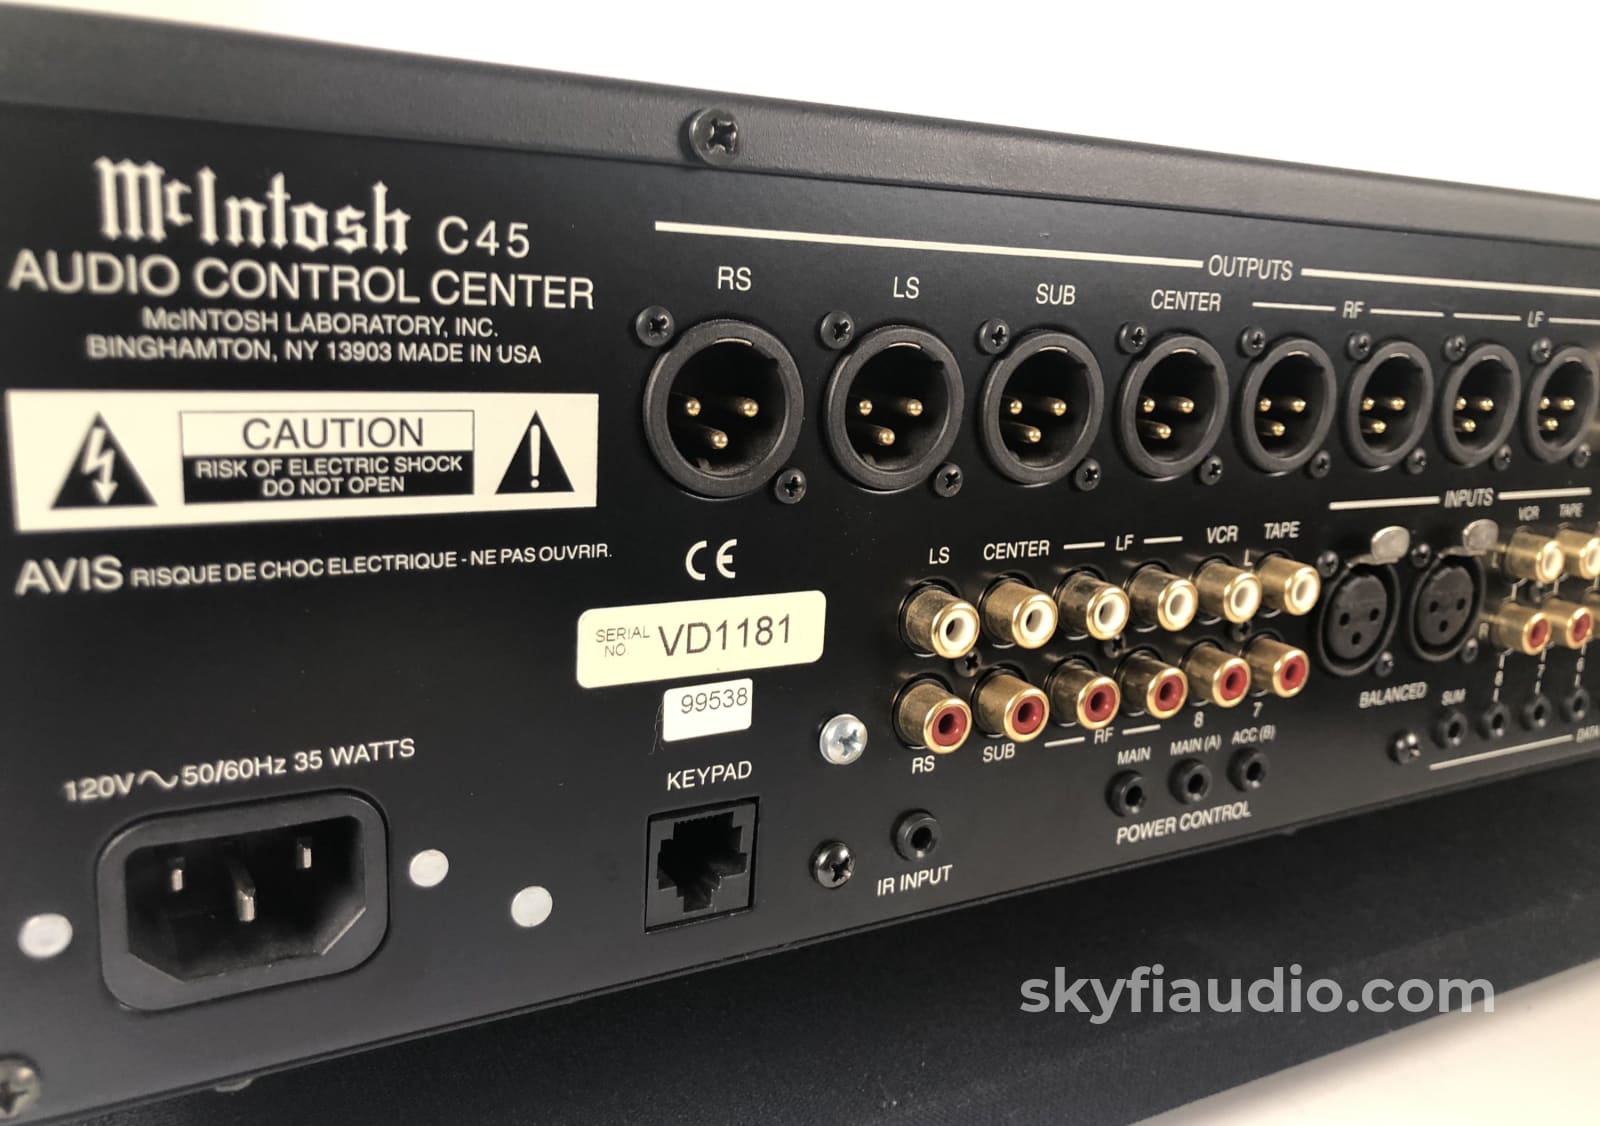 McIntosh C45 Preamp - all Analog with Phono Input